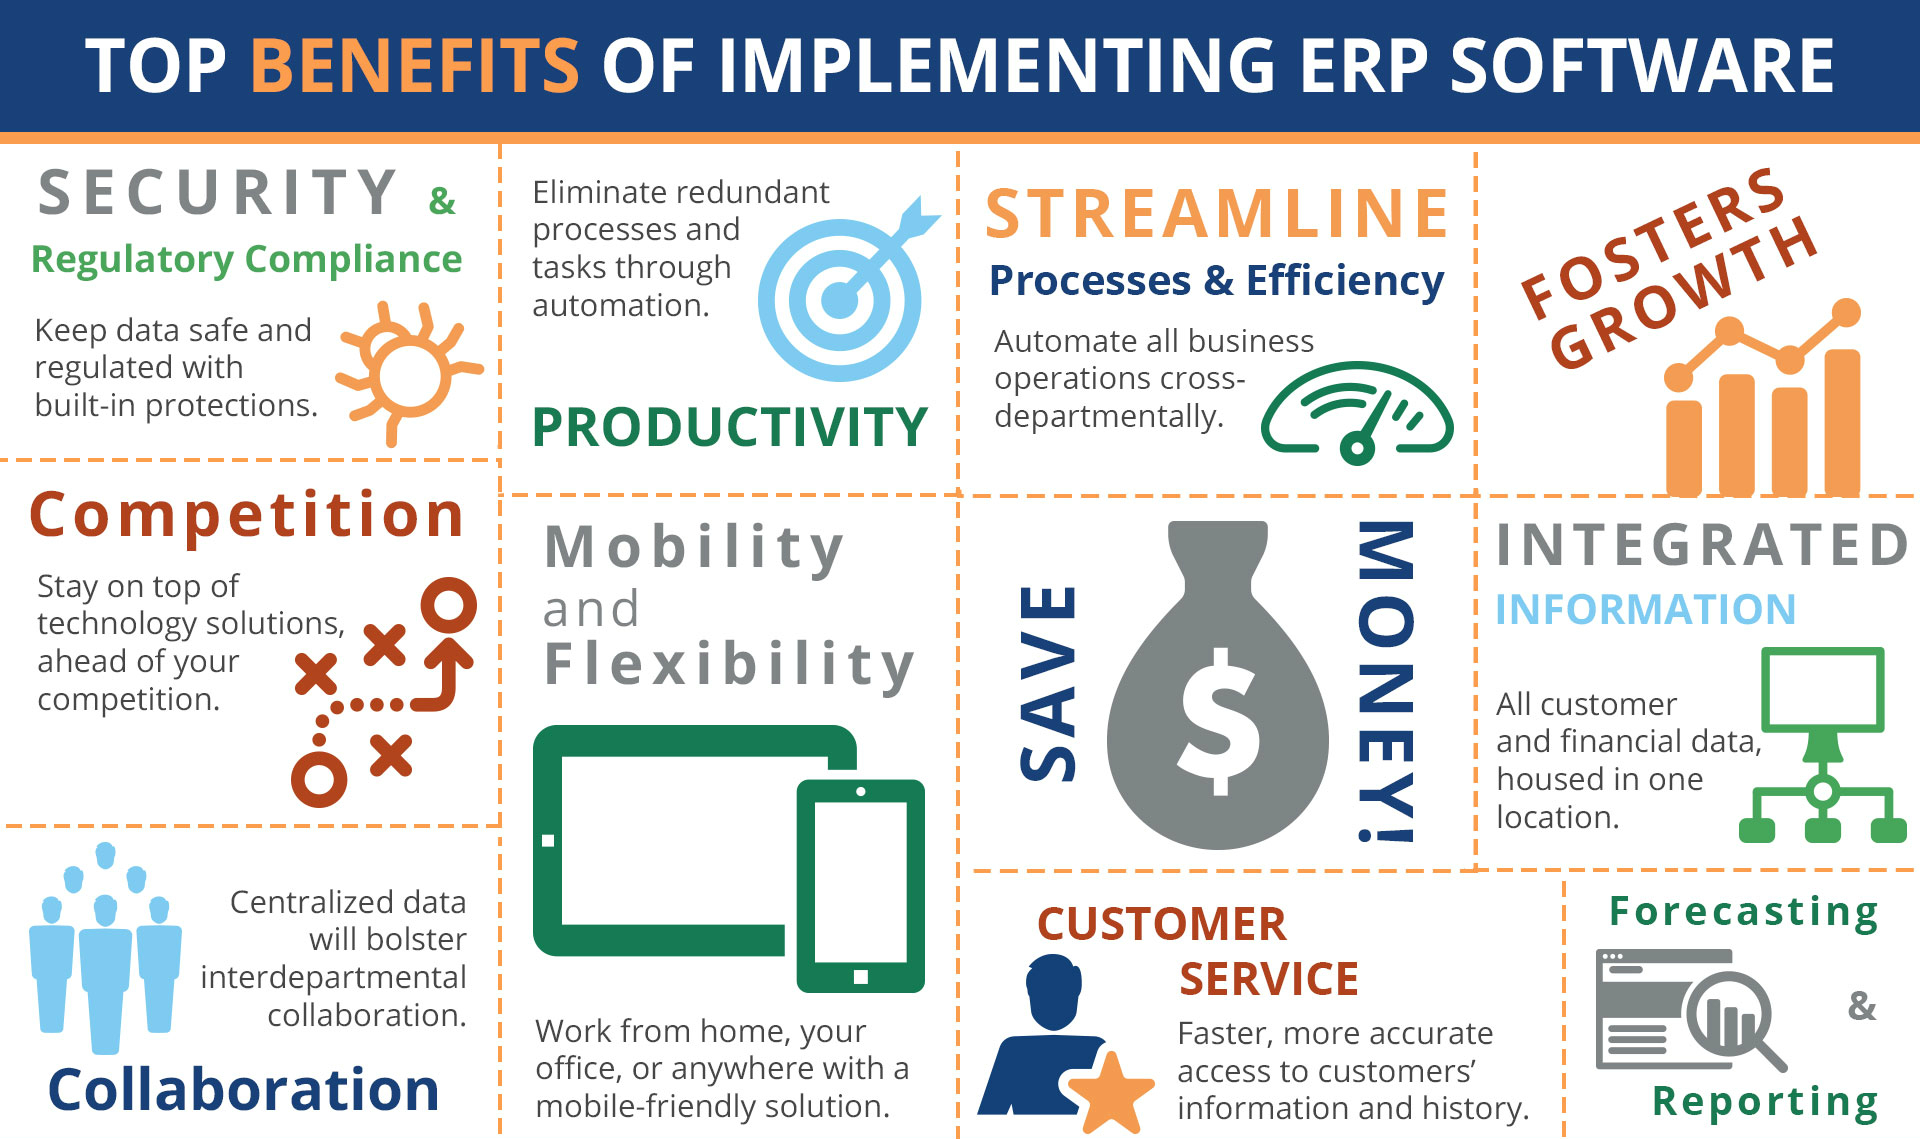 5 little known benefits of ERP Software